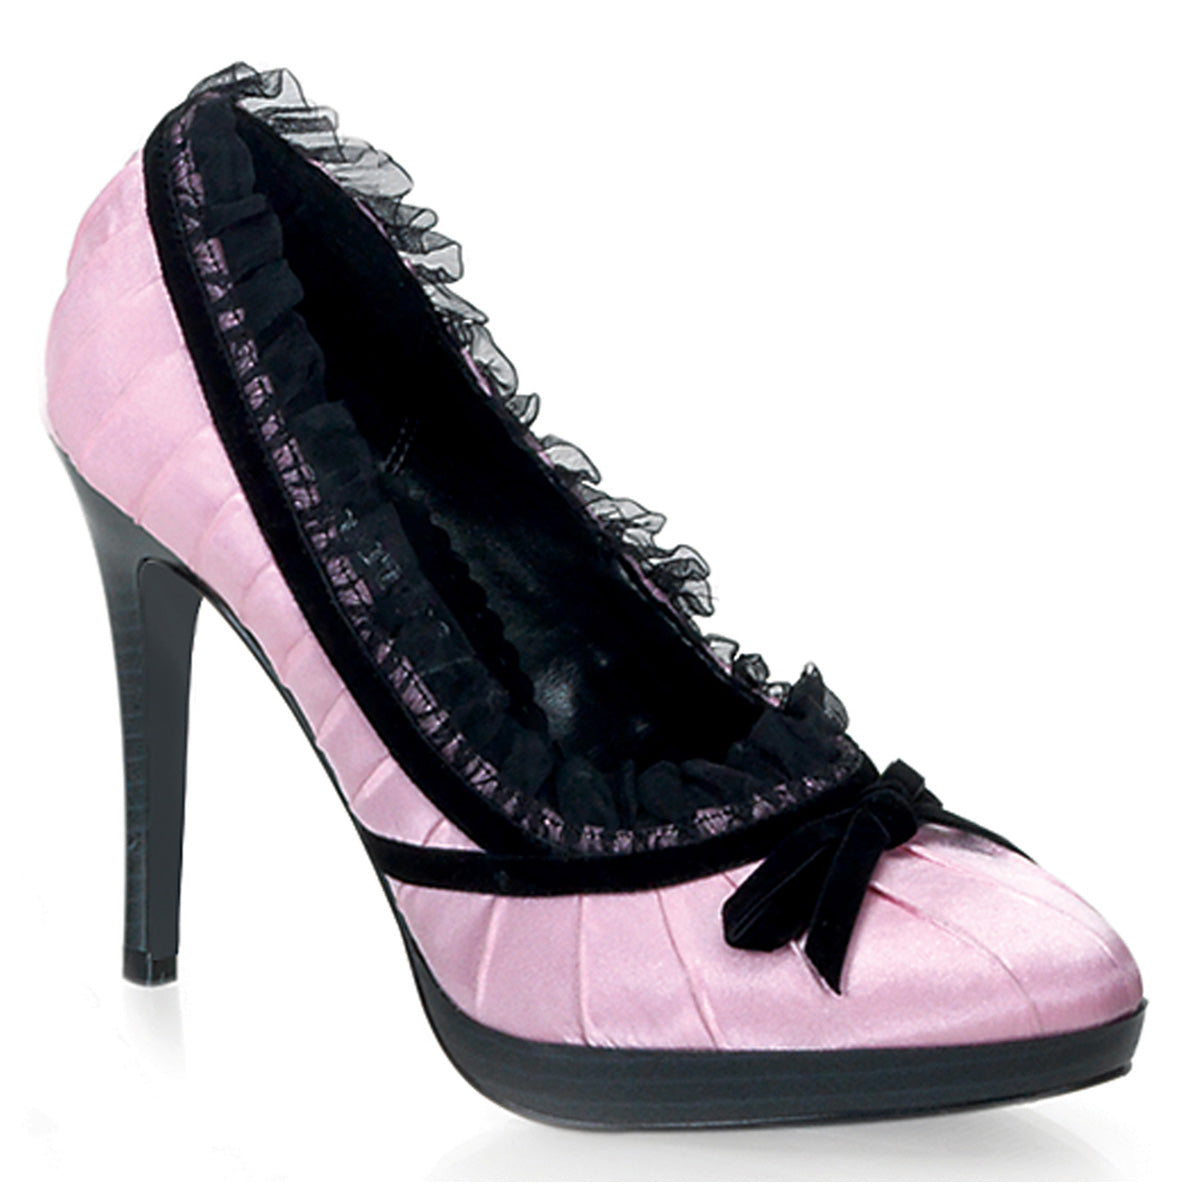 BLISS-38 Retro Glamour Pin Up Couture Platforms Pink-Blk Satin